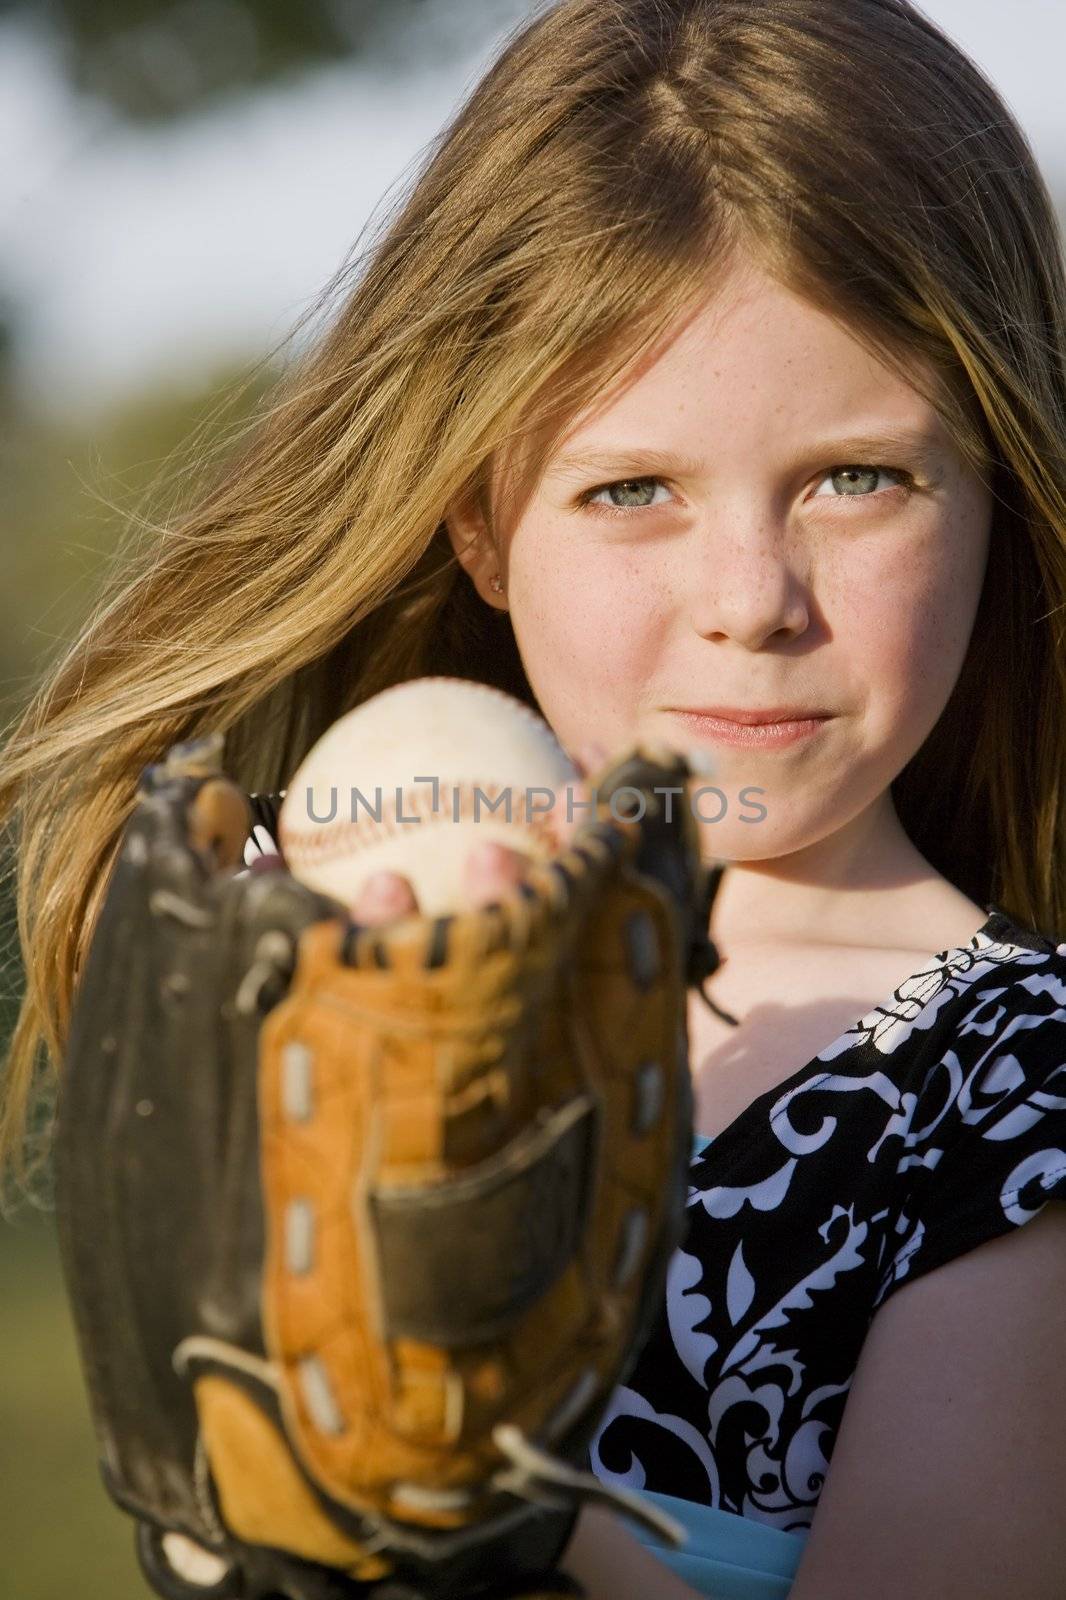 Cute young girl with a baseball by Creatista